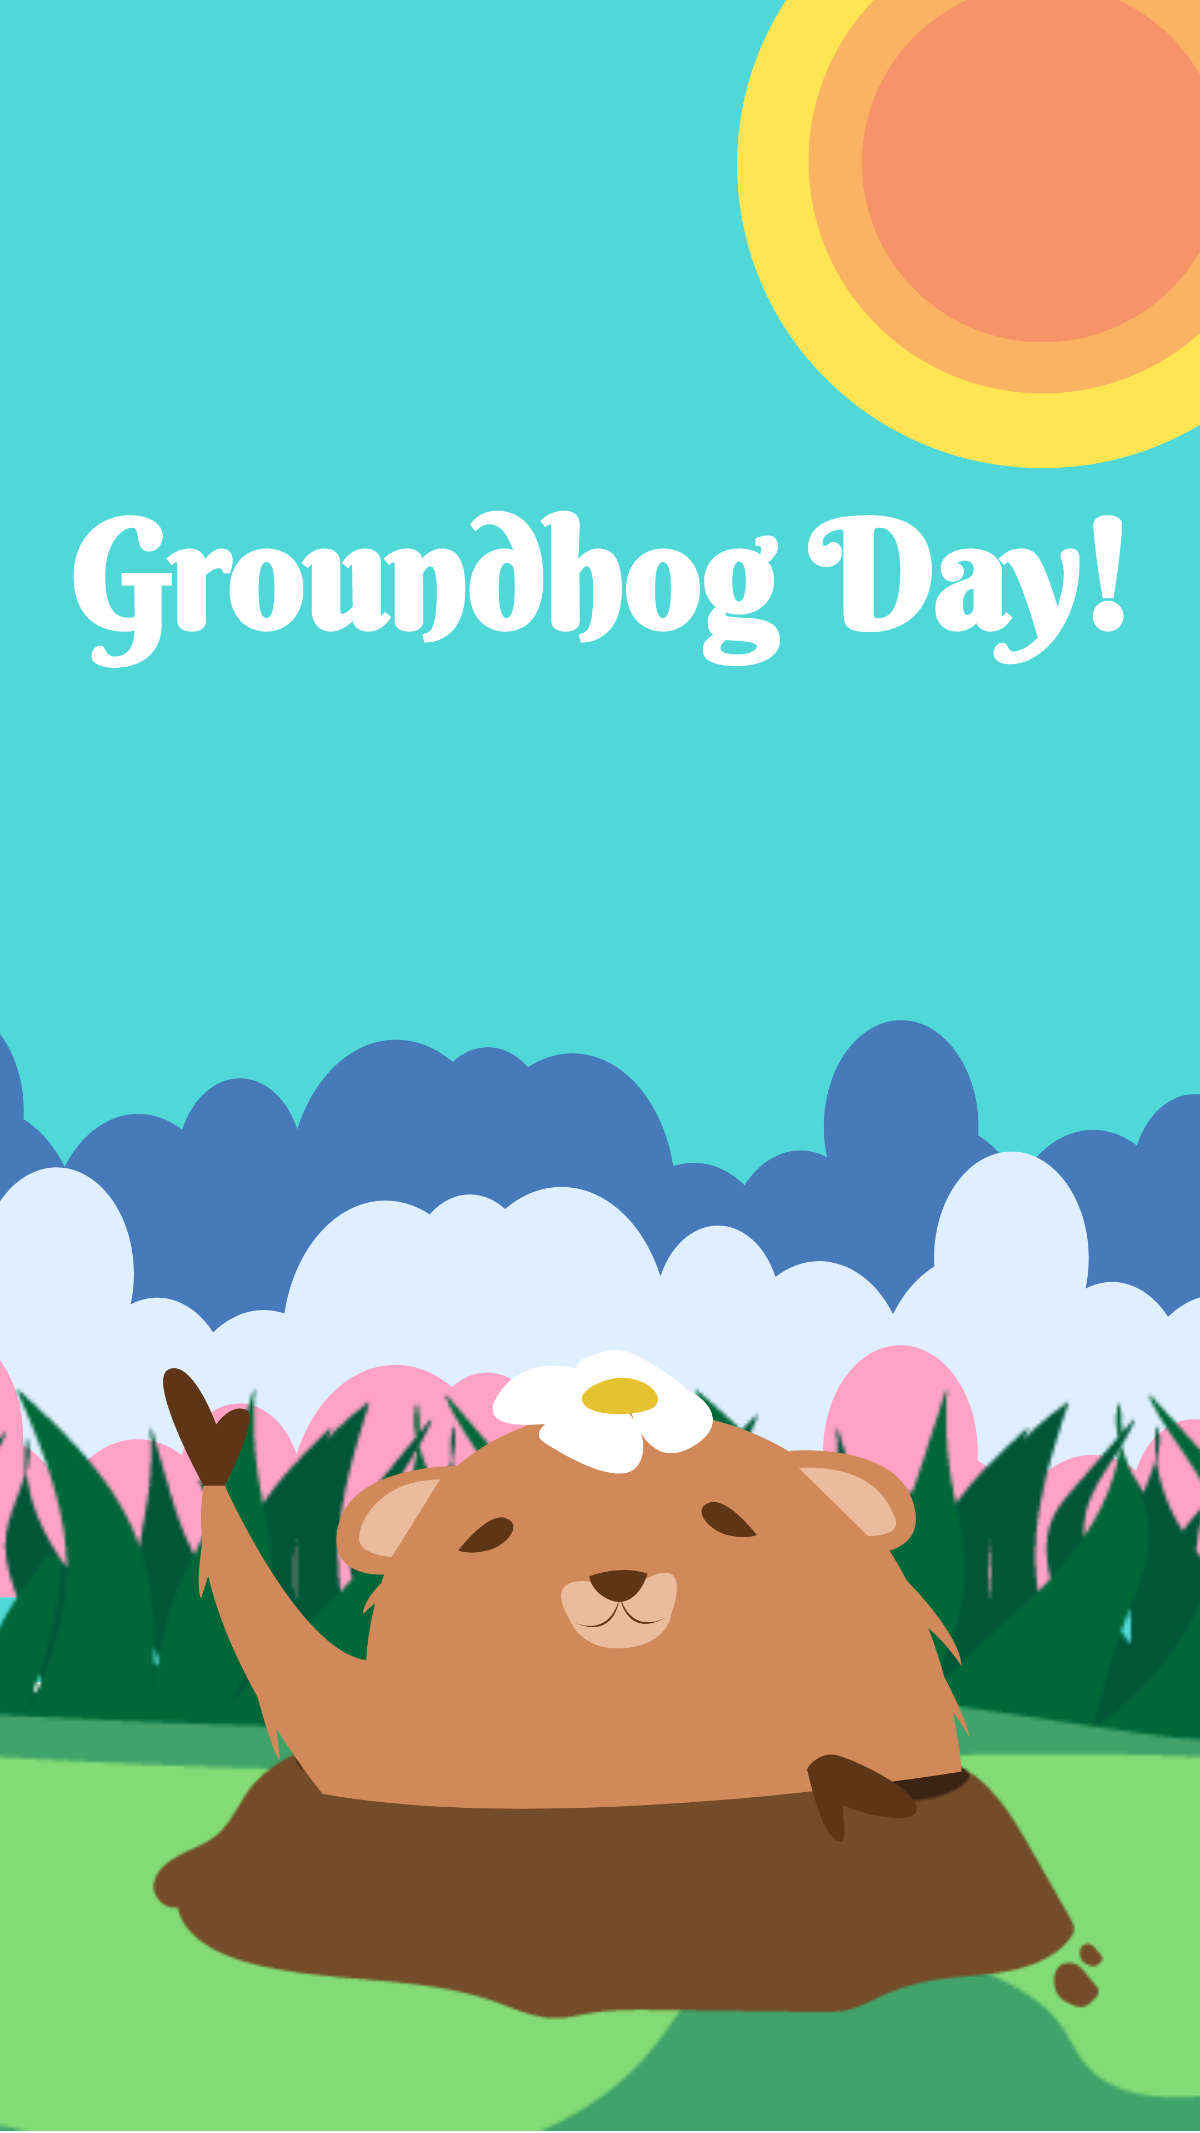 Groundhog Day iPhone Background Template